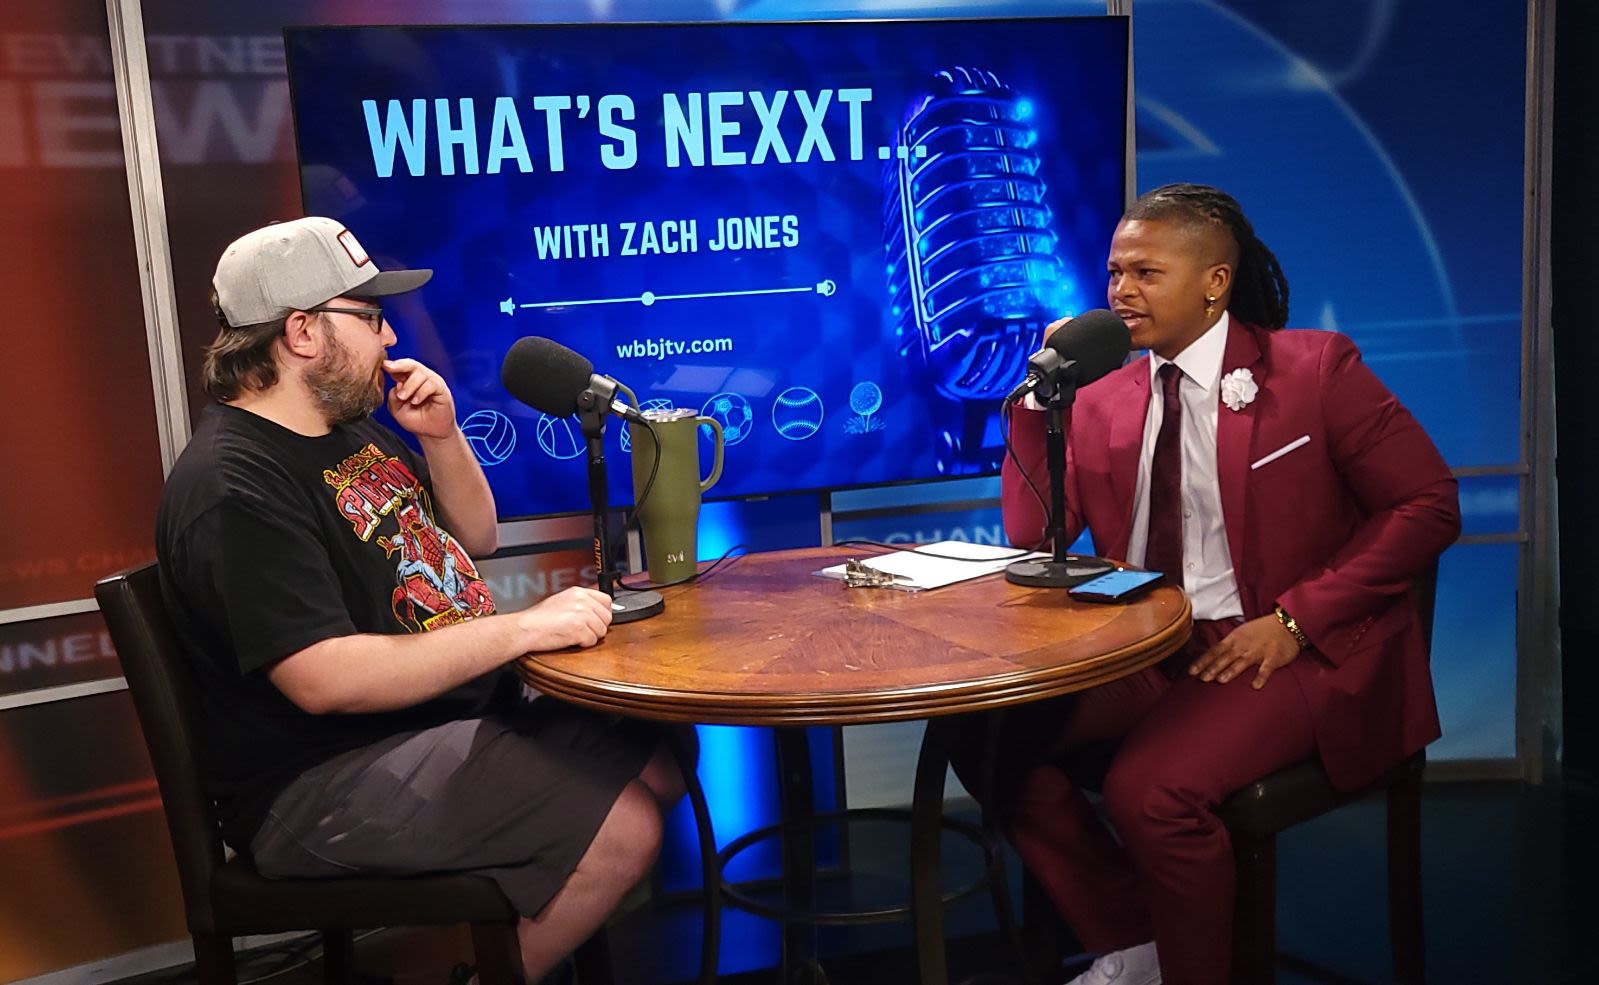 In the "WHAT'S NEXXT..." podcast we discuss the Nuggets in trouble against the T'wolves, Kendrick Lamar and Drake Rap beef and can NBA players play in the NFL? - WBBJ TV